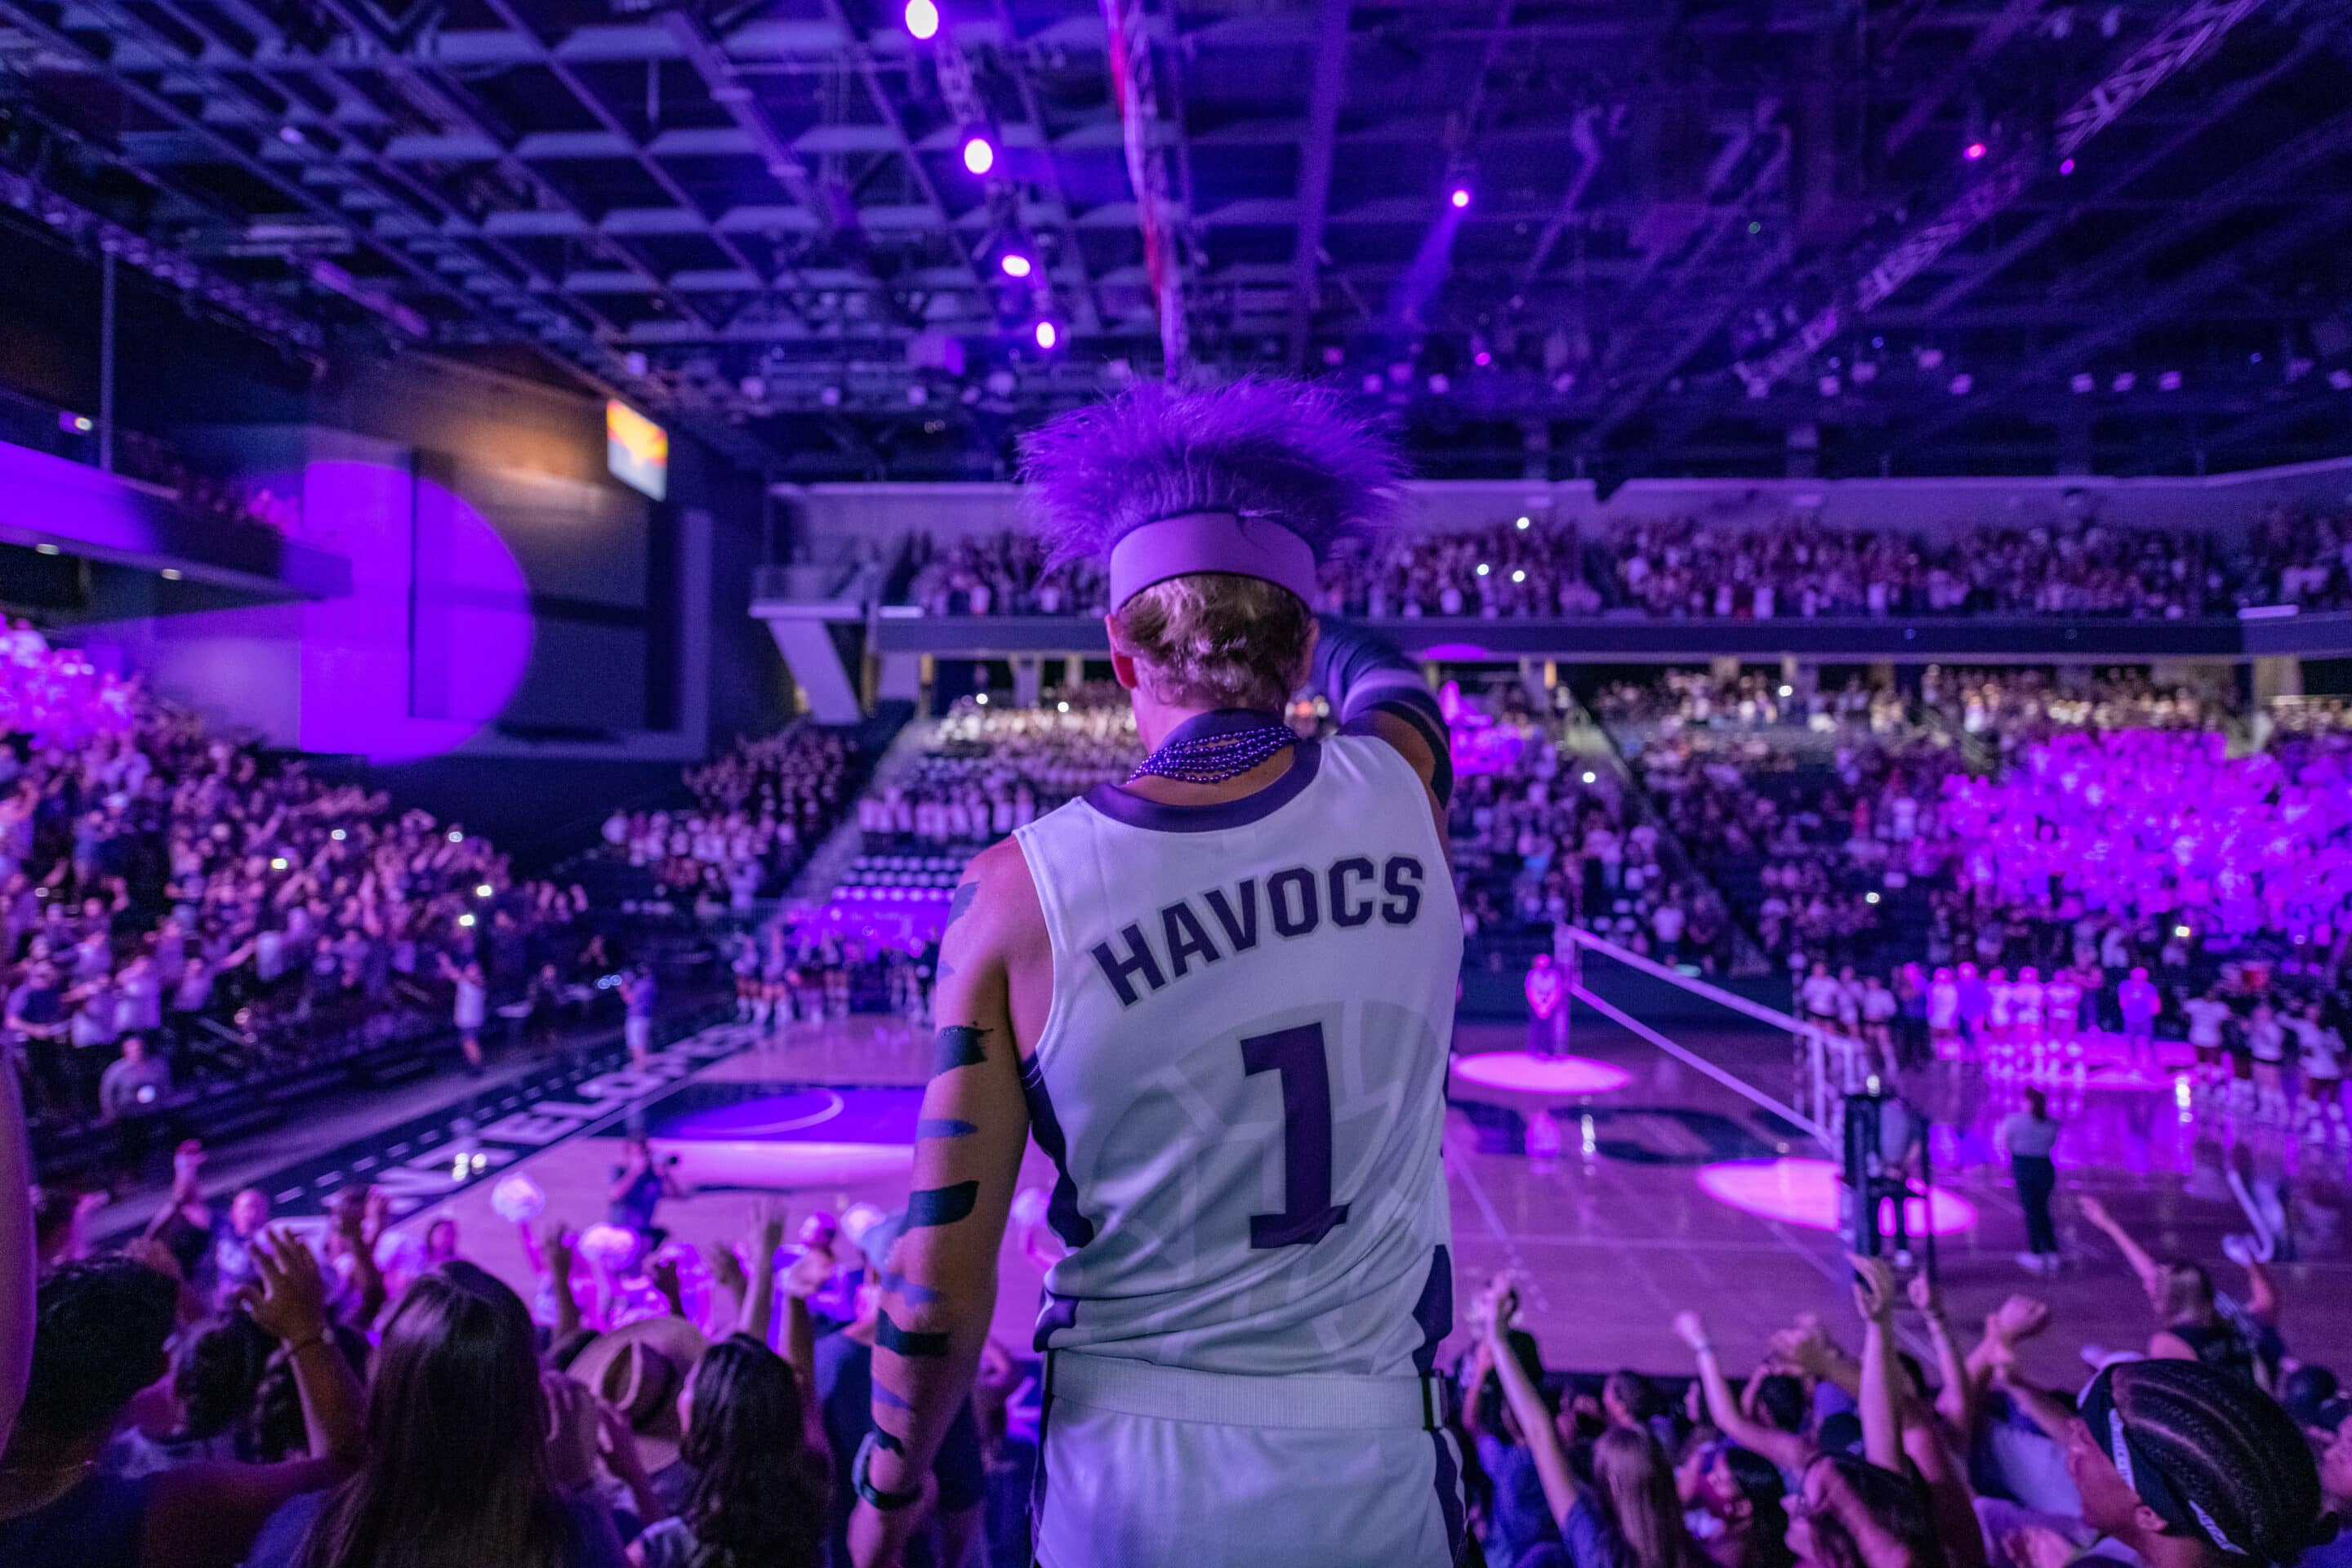 A GCU Havocs leader stands at the top of the student section with his back to the camera.